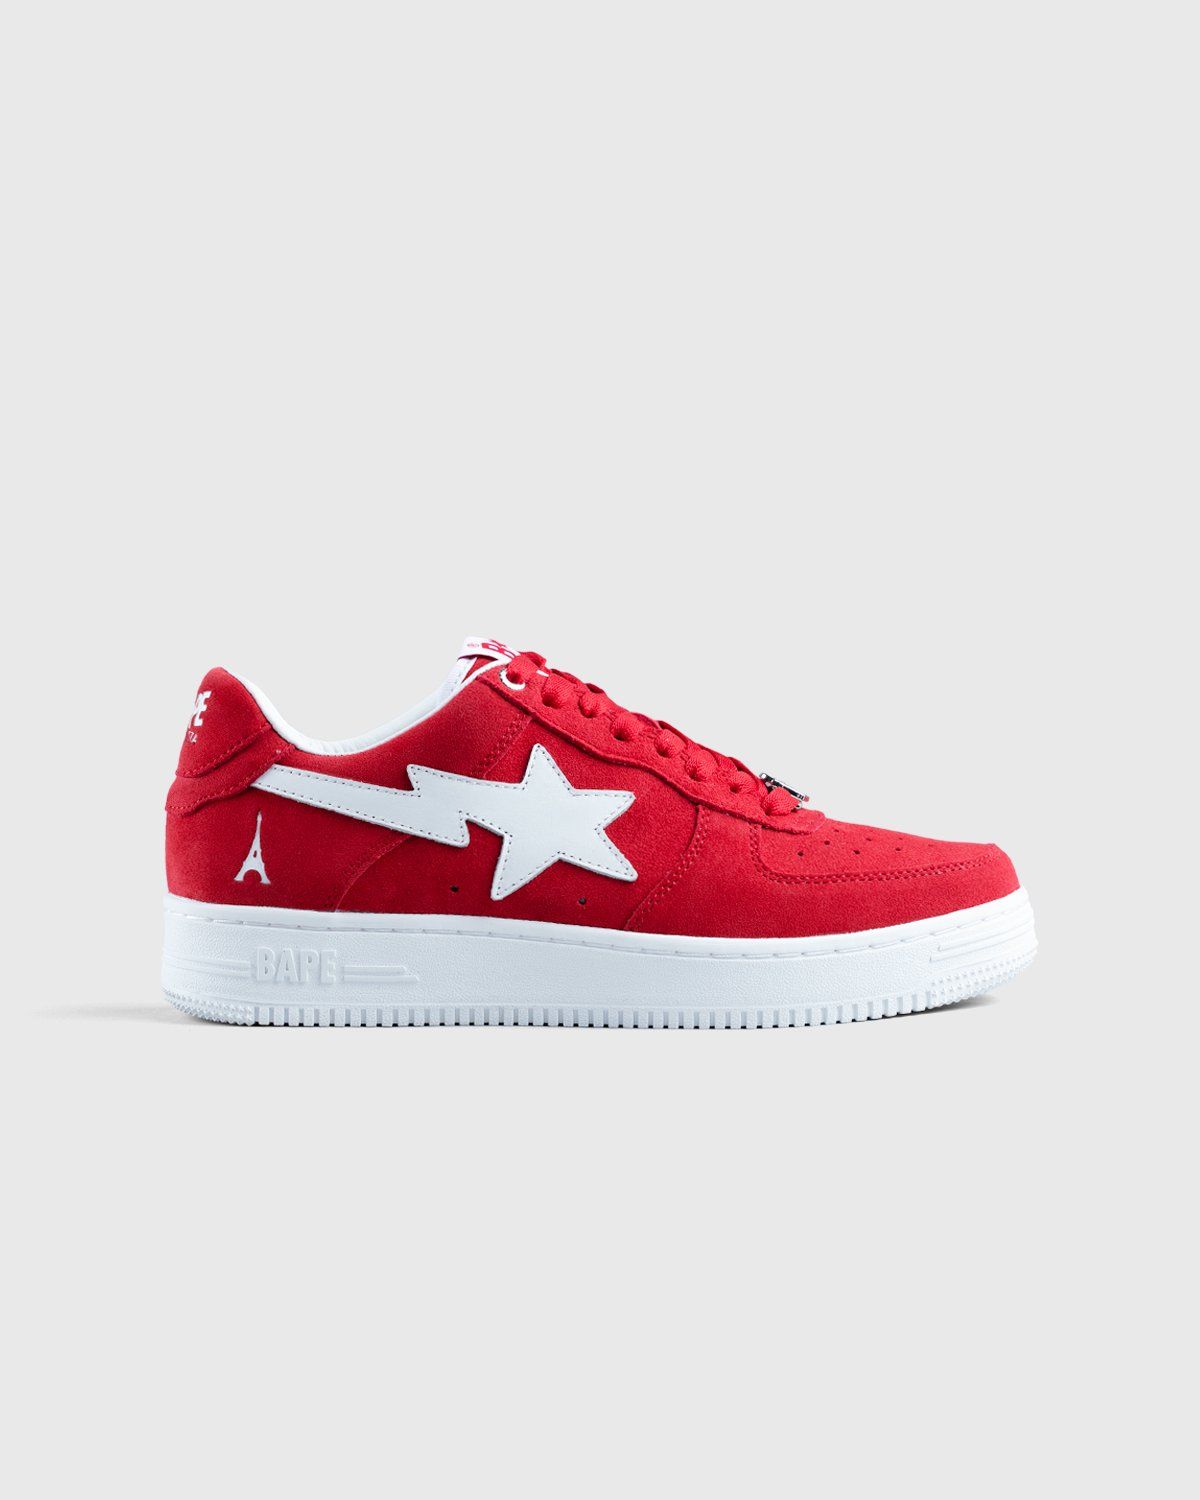 BAPE x Highsnobiety – BAPE STA Red - Low Top Sneakers - Red - Image 1